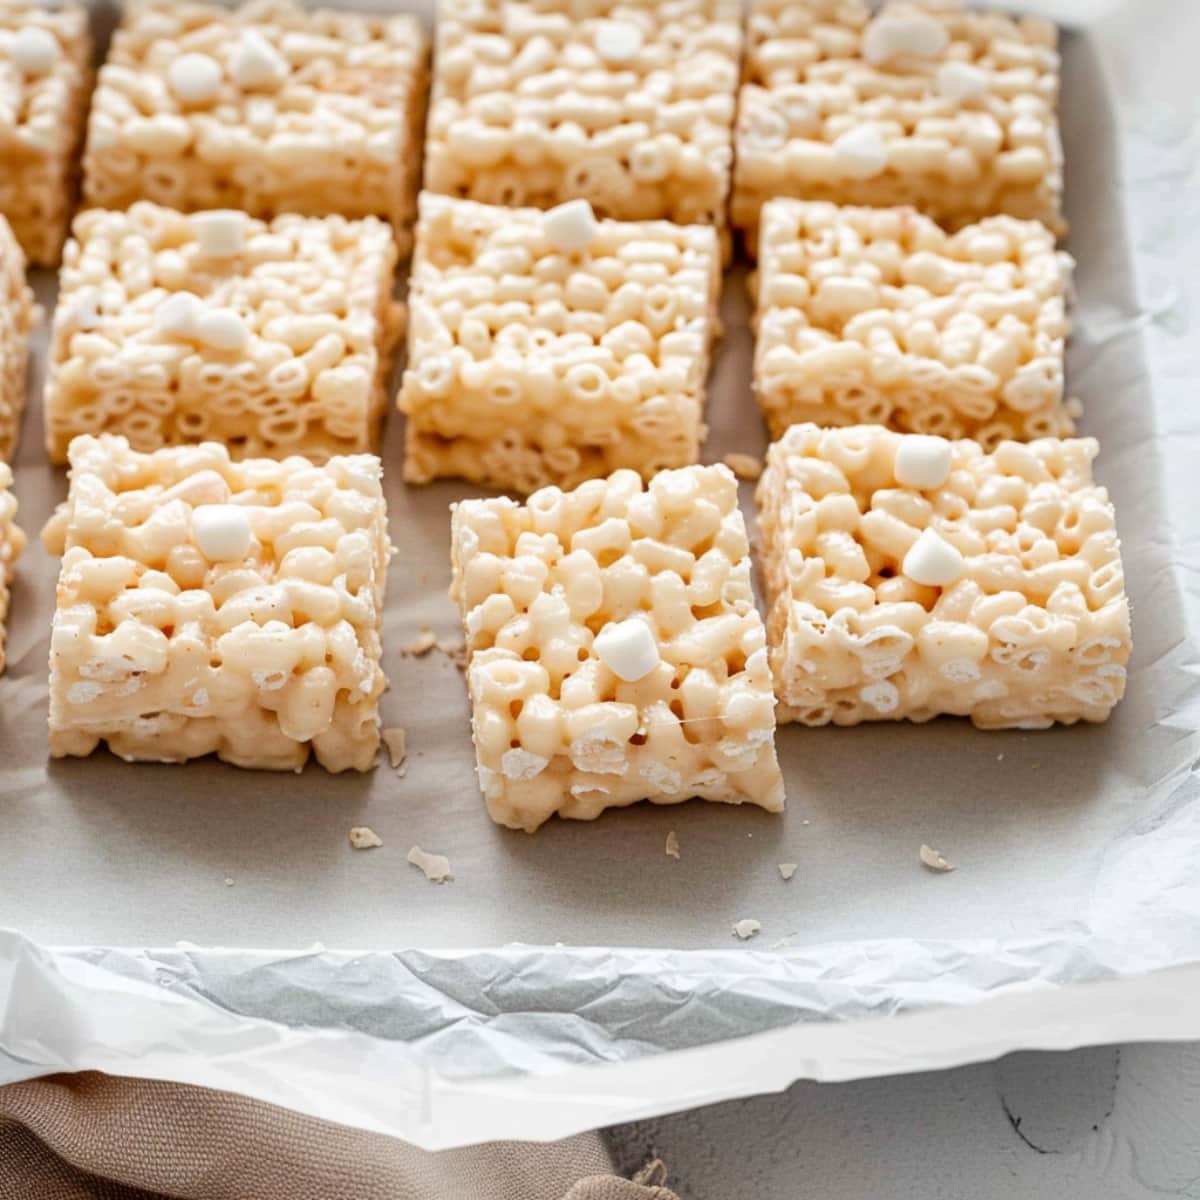 Crispy and chewy homemade rice krispy treats on a parchment paper